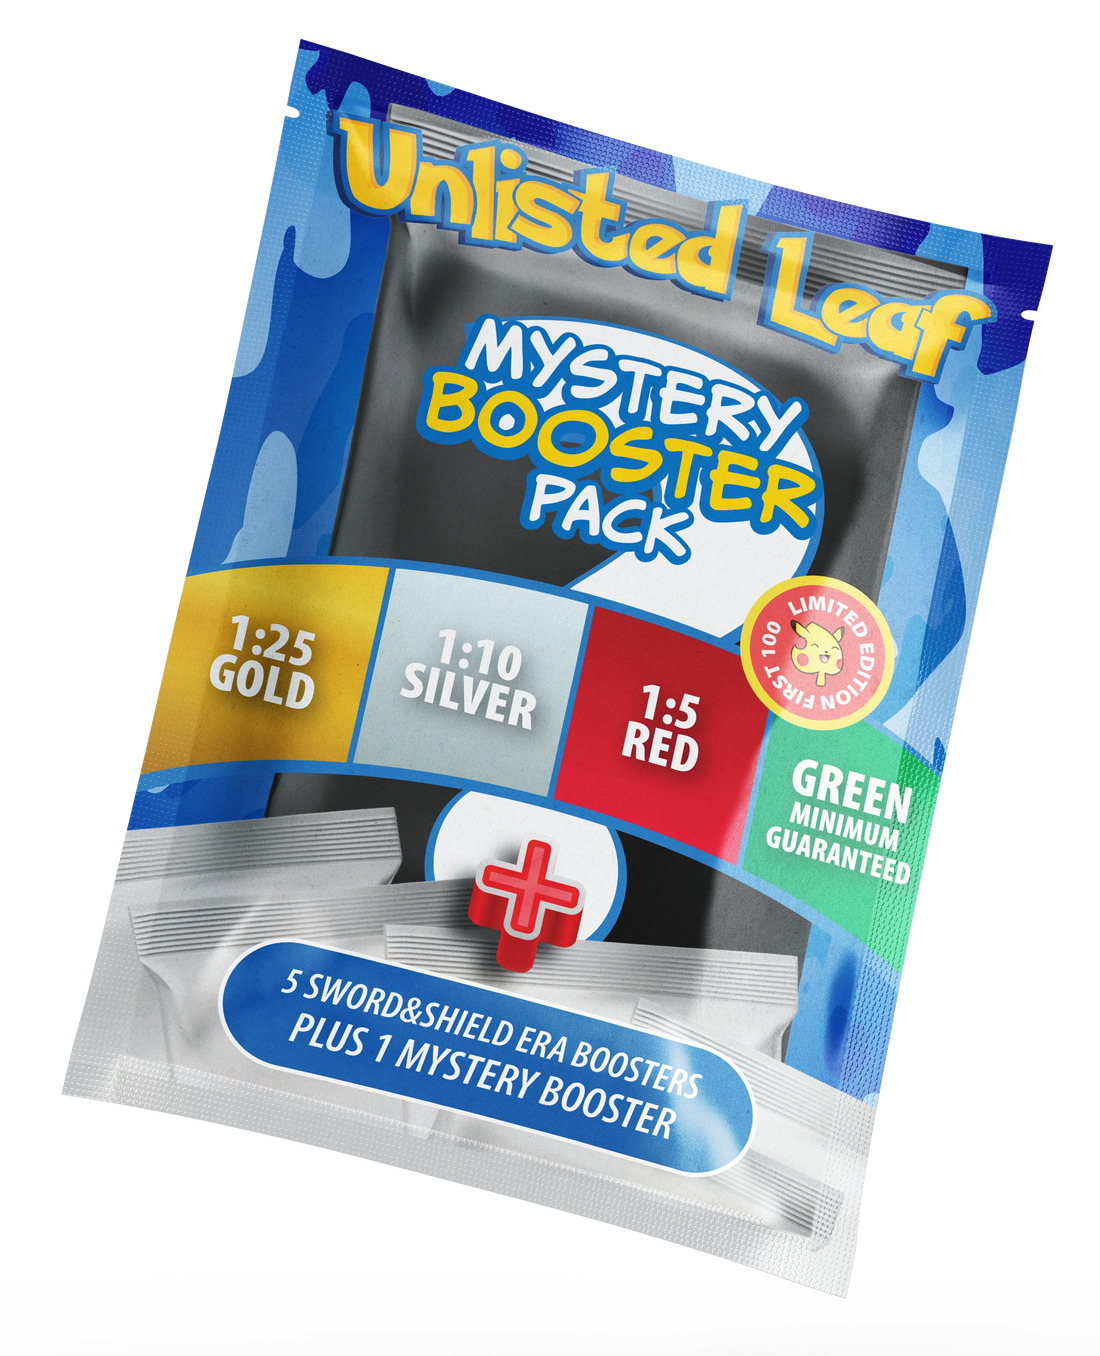 First Edition Unlistedleaf Mystery Booster Pack